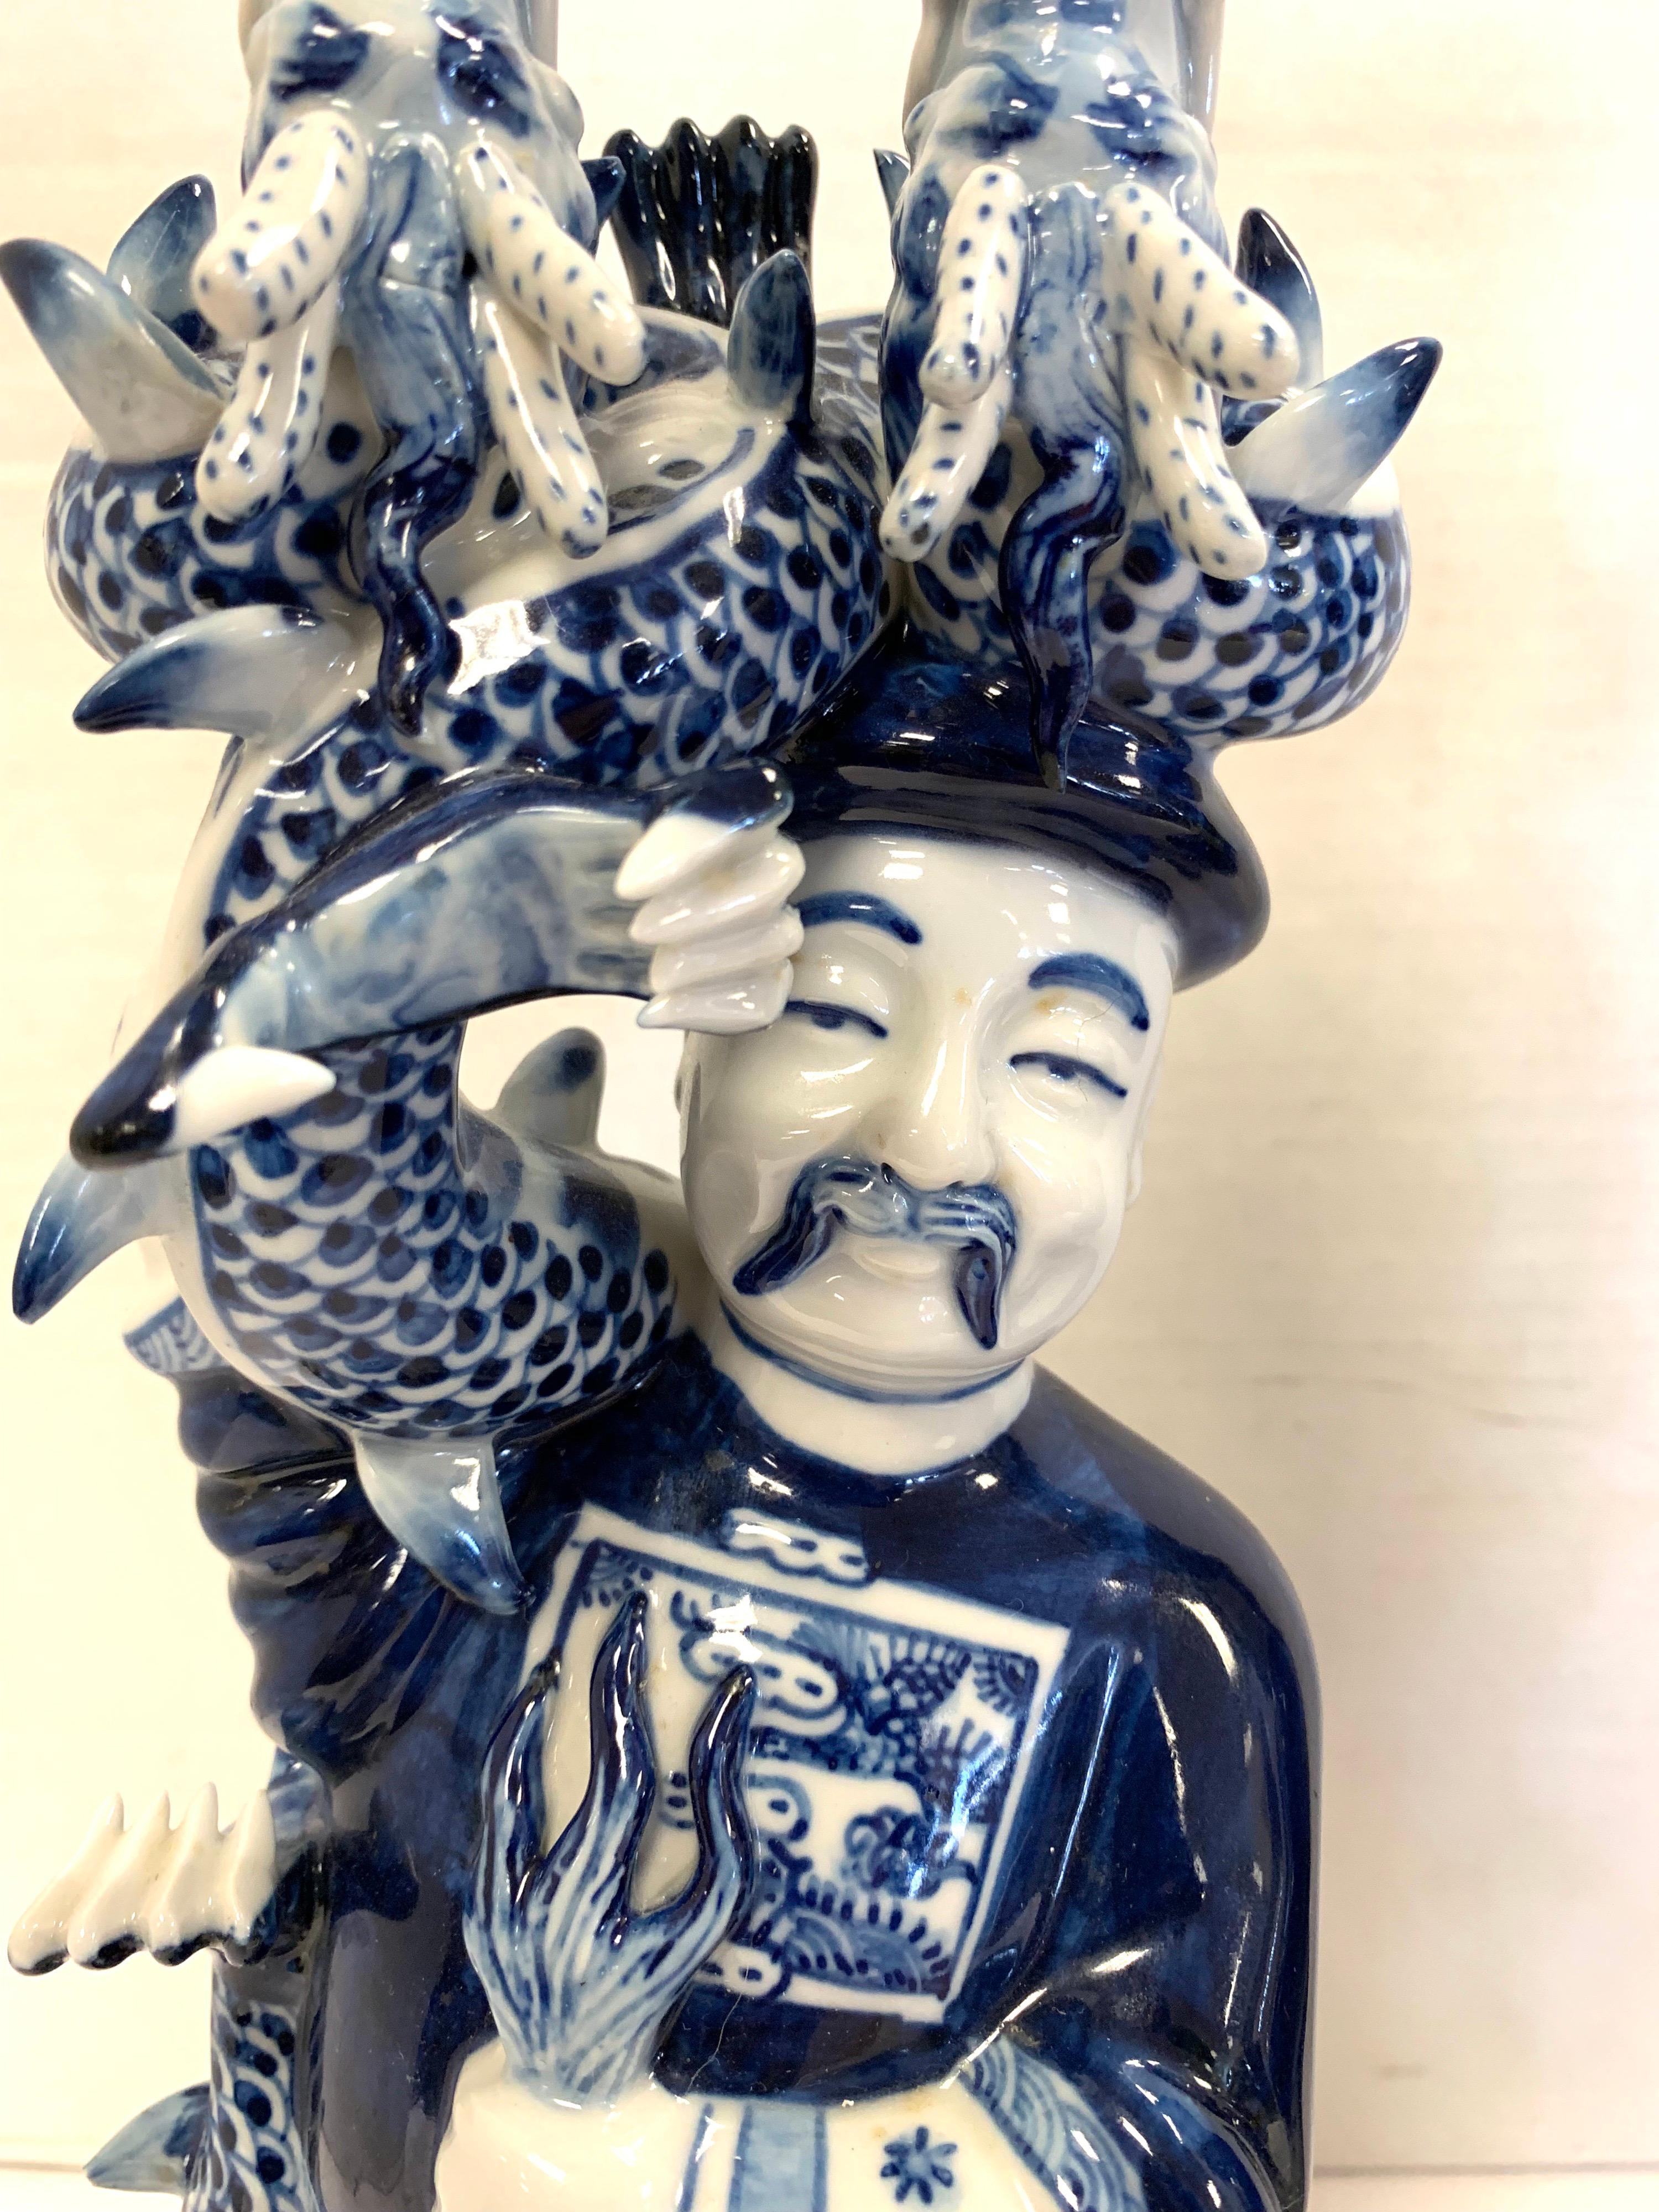 Stunning Chinese blue and white porcelain figural candleholders featuring an Asian man happily holding a two headed serpentine. Each hold two candles. These unique candlesticks will surely add character to your home.